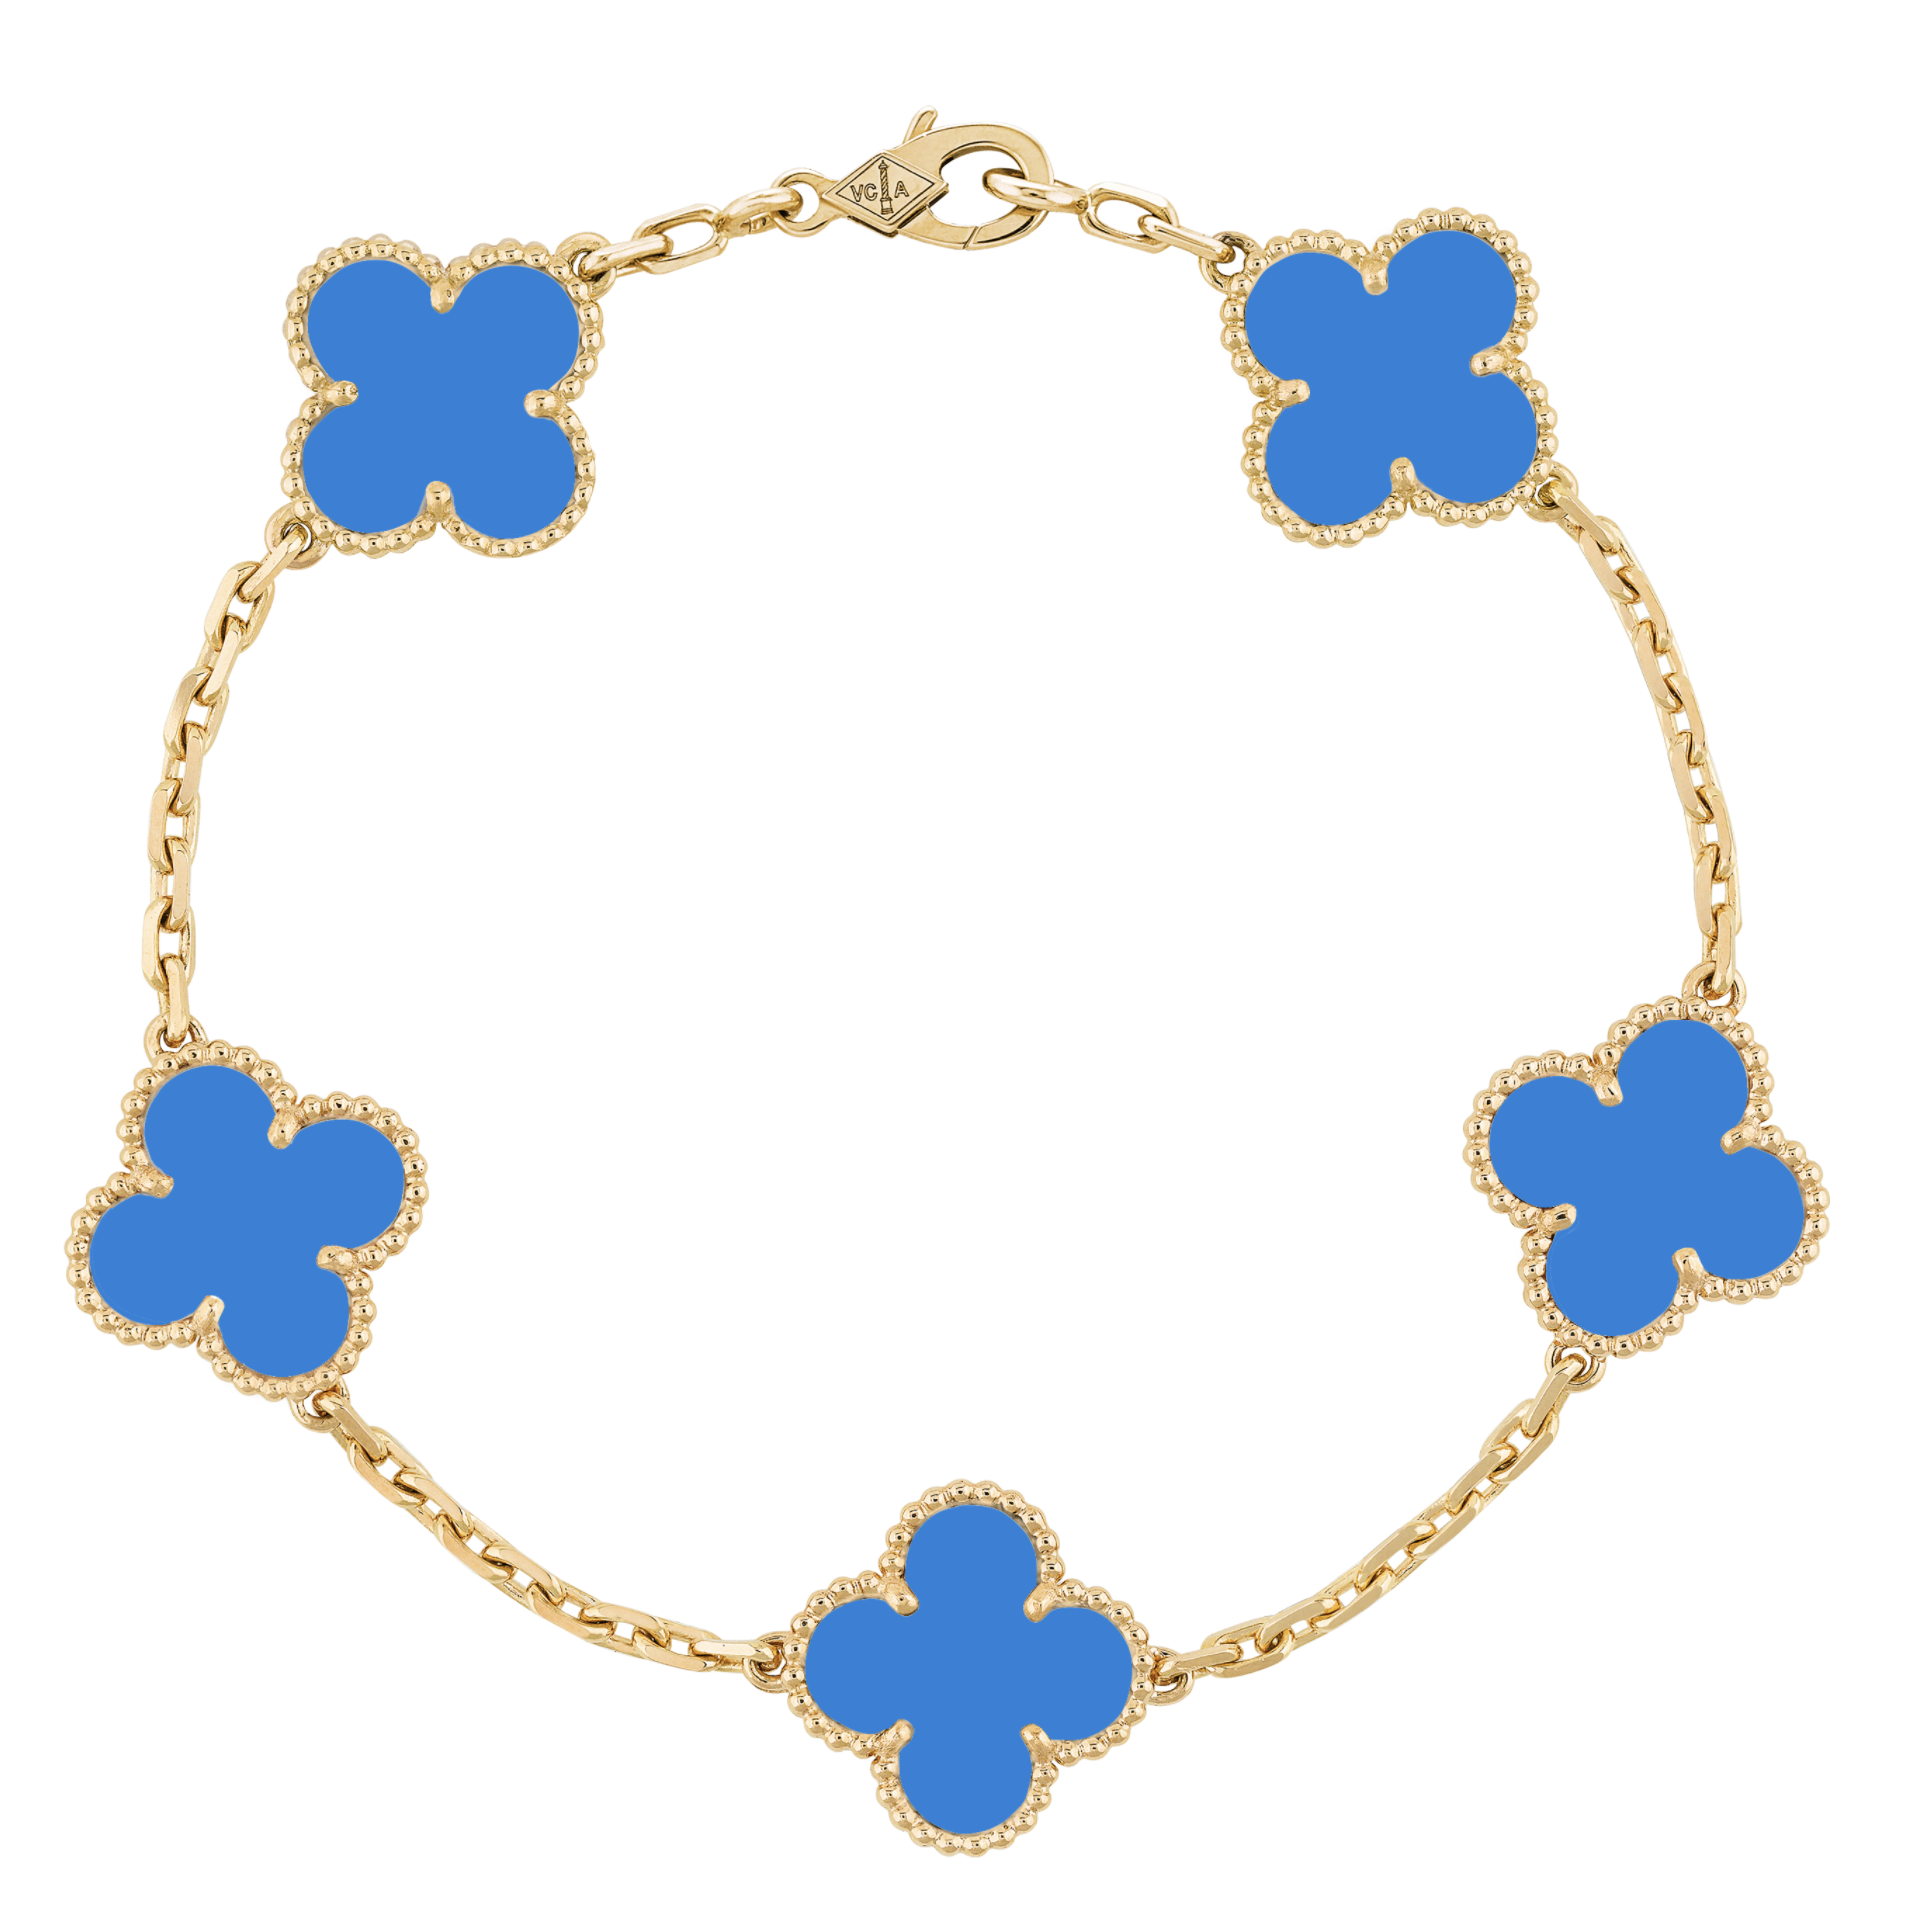 something-blue-jewellery-pieces-for-your-wedding-day-van-cleef-arpels